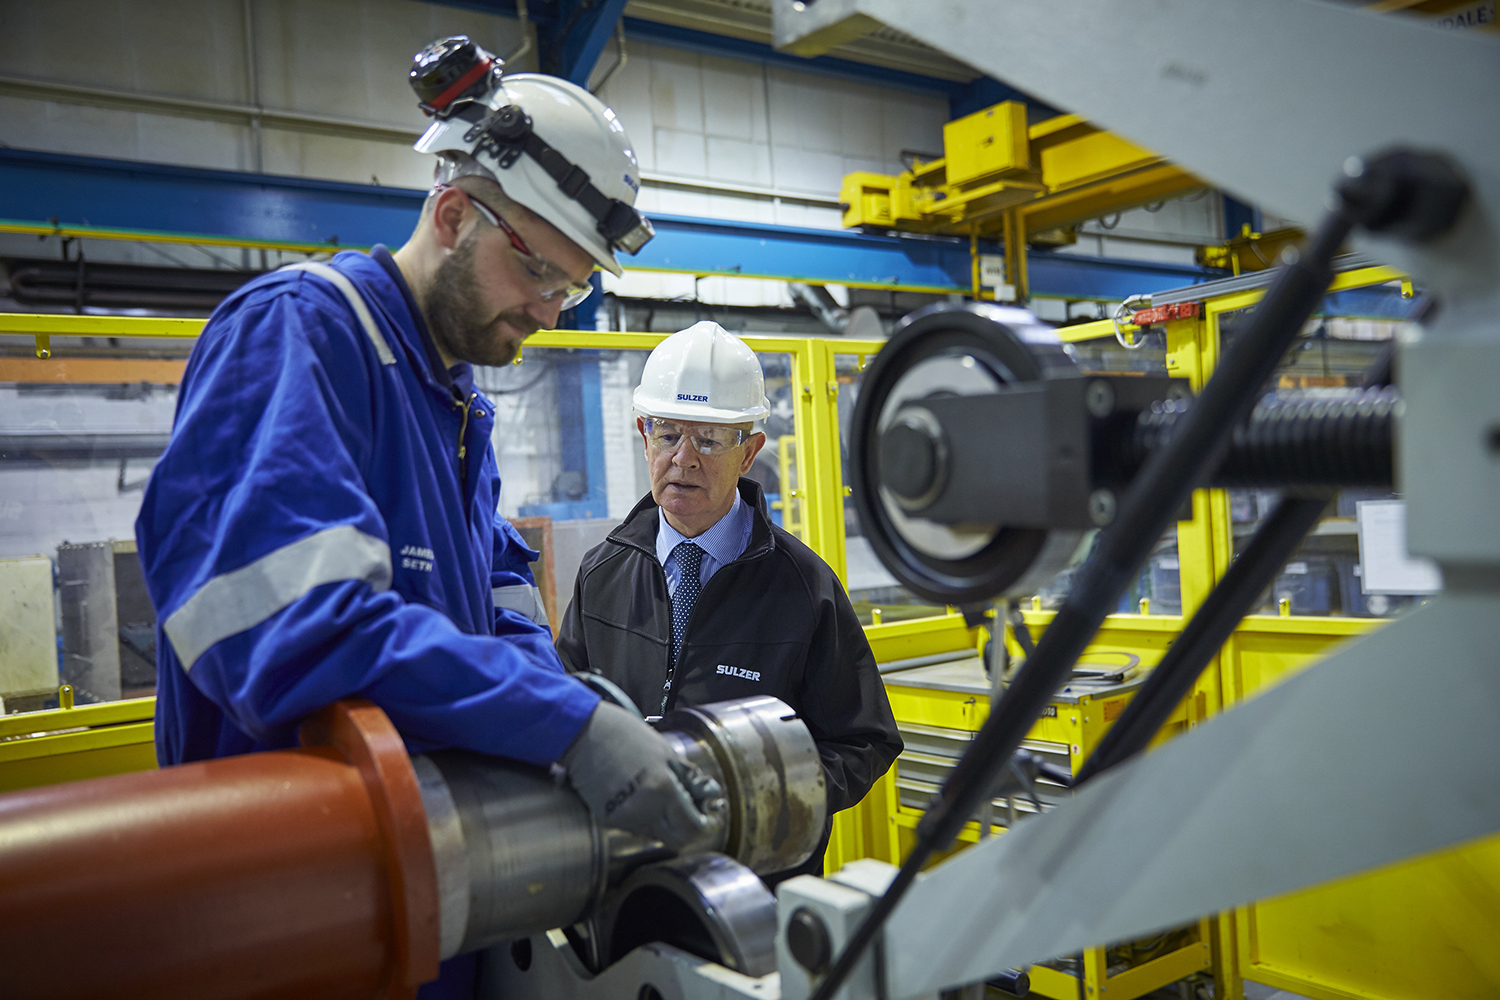 Sulzer pump experts suggested an approach that could save its customer time and money.